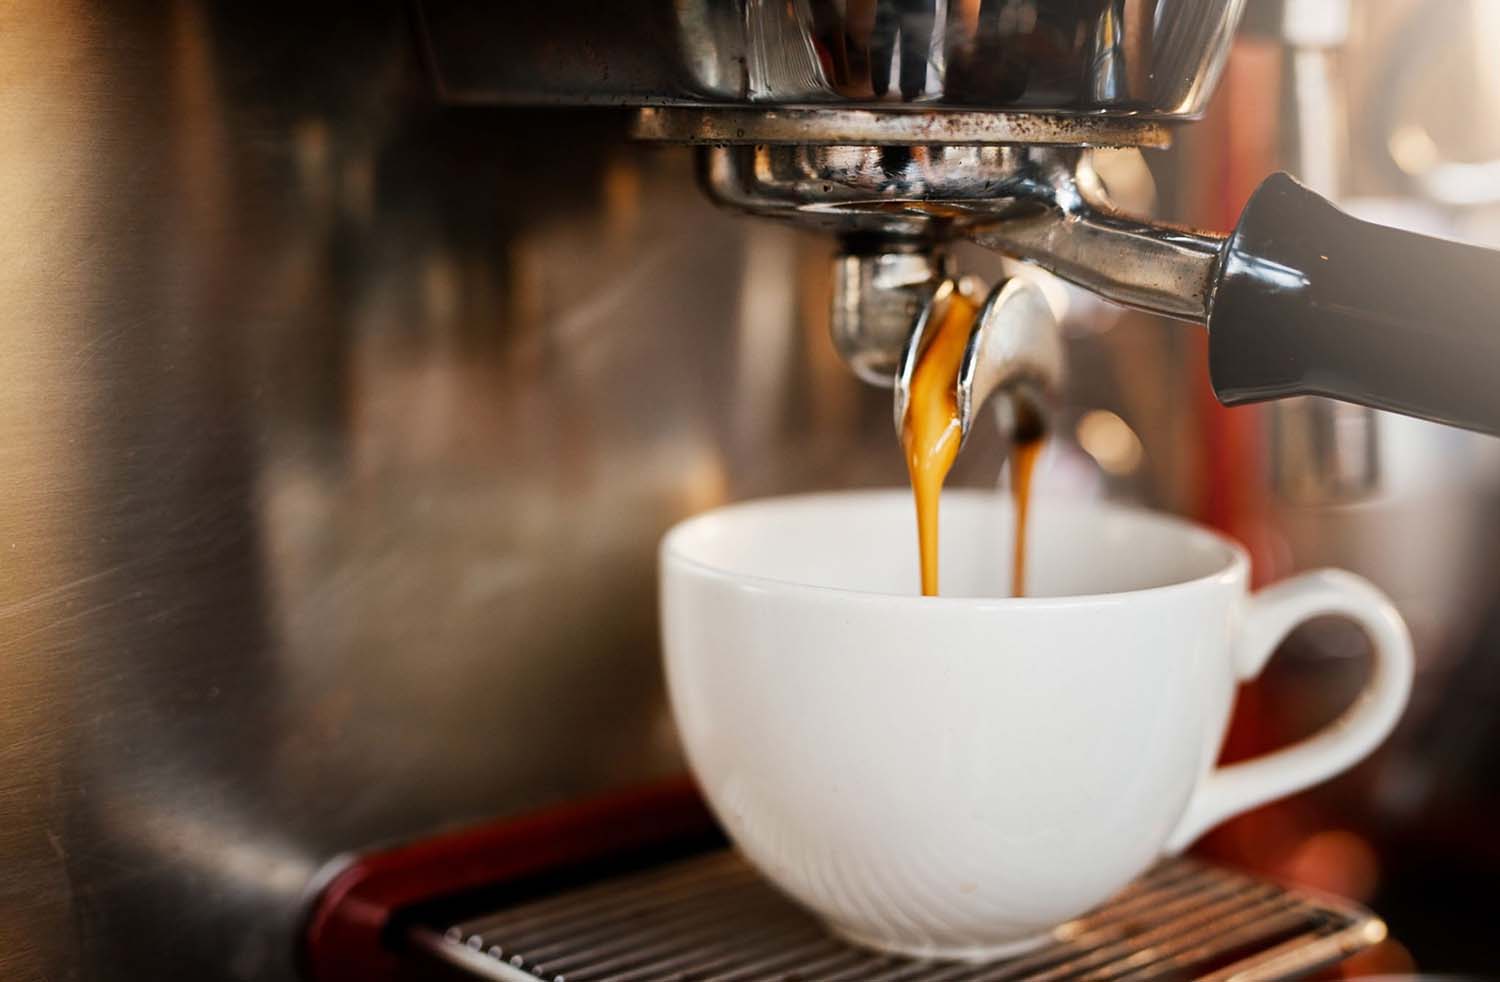 Top Drinks To Make With Your Coffee Machine